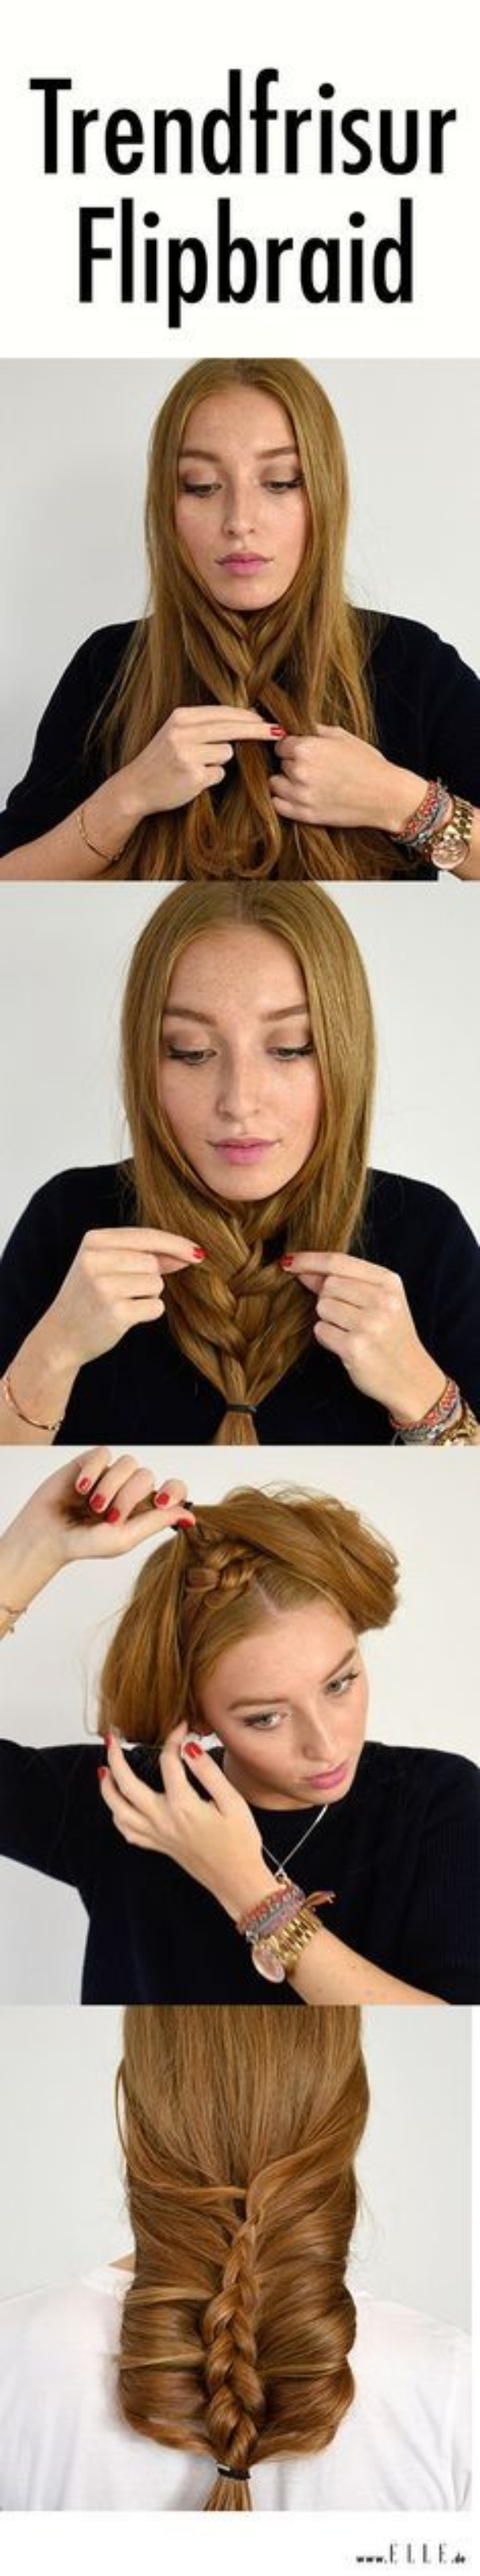 Hairstyles-That-Can-be-Done-in-3-Minutes